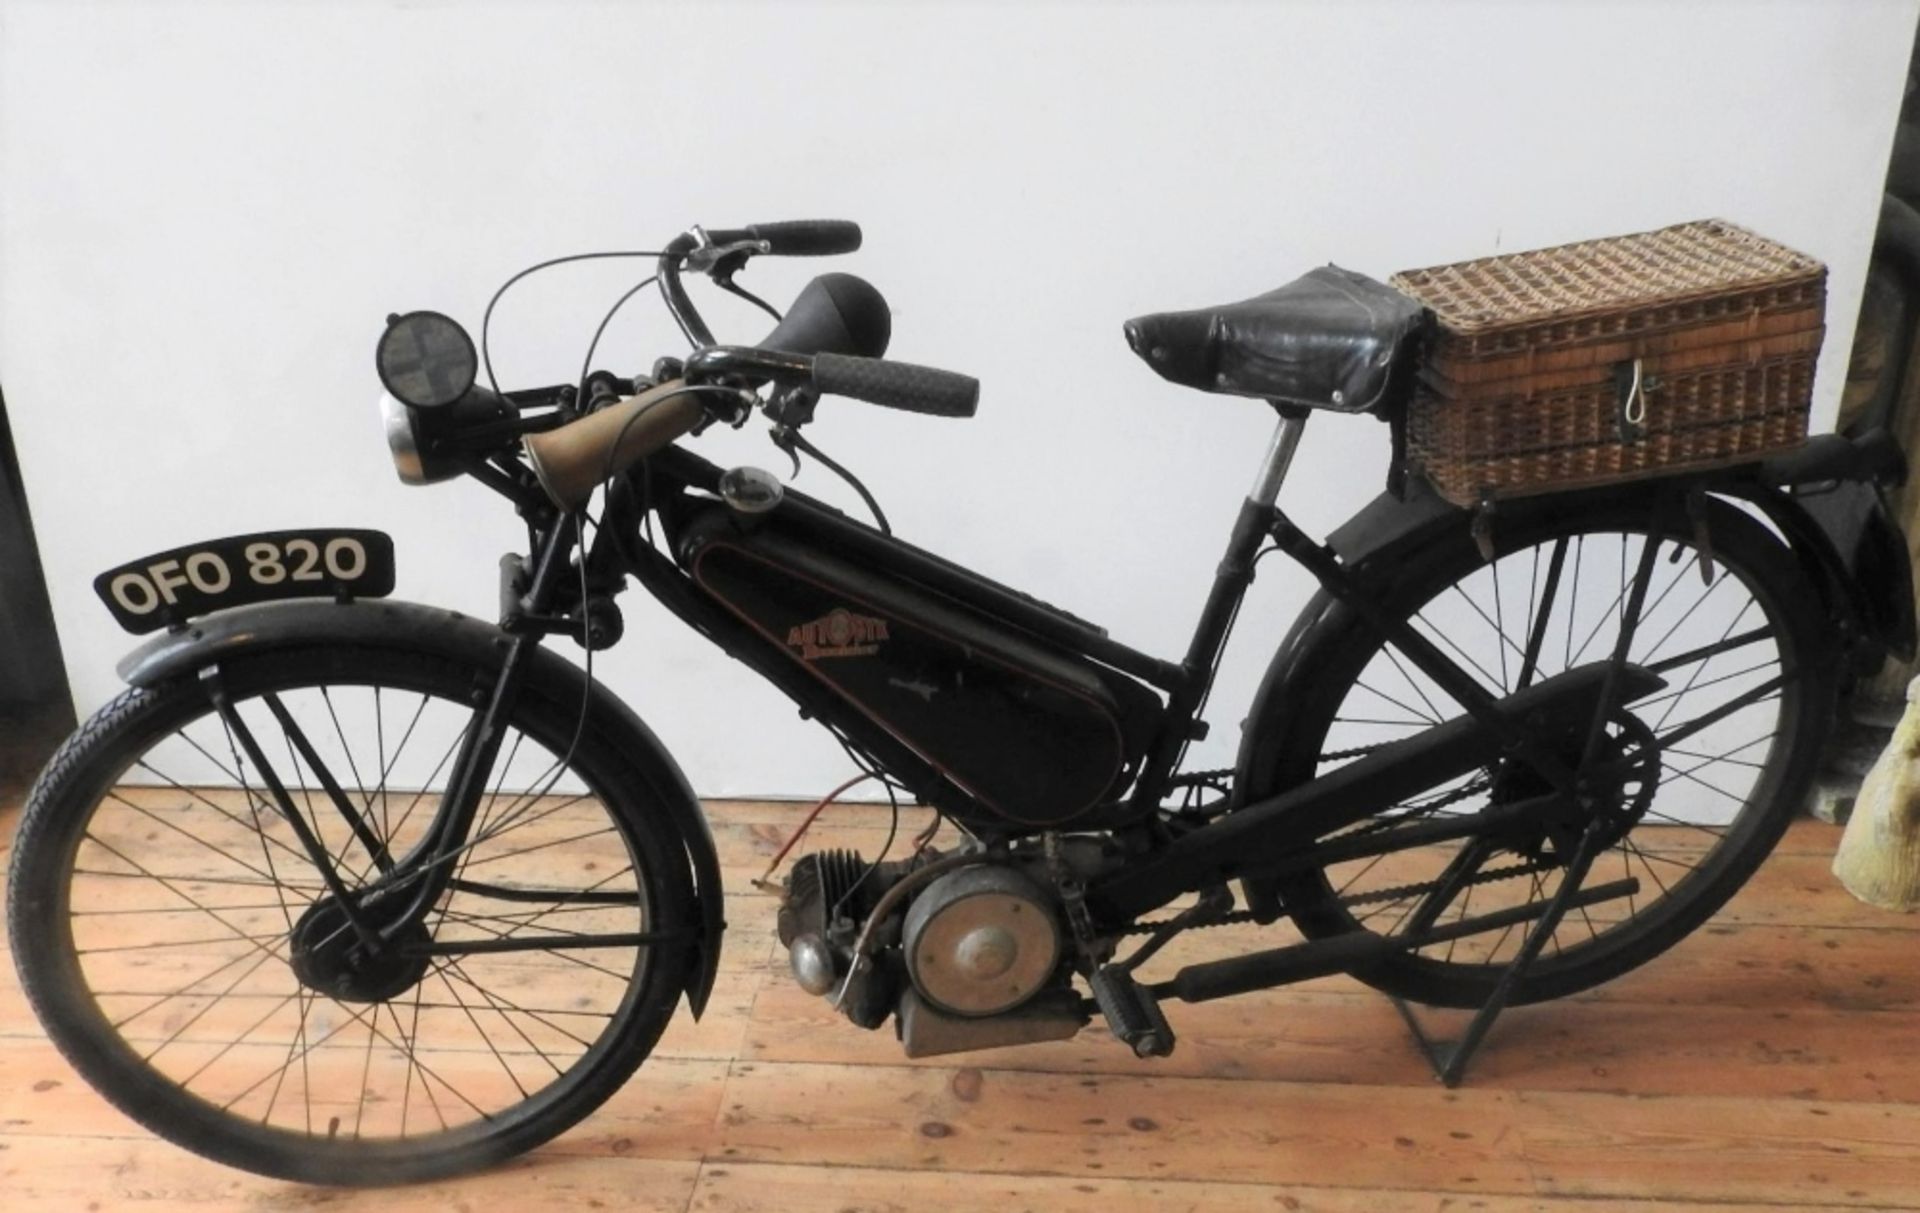 1948 EXCELSIOR AUTOBYK Registration number: OFO 820 Frame Number: S.A.7880 Recorded Mileage: n/a - Image 2 of 5